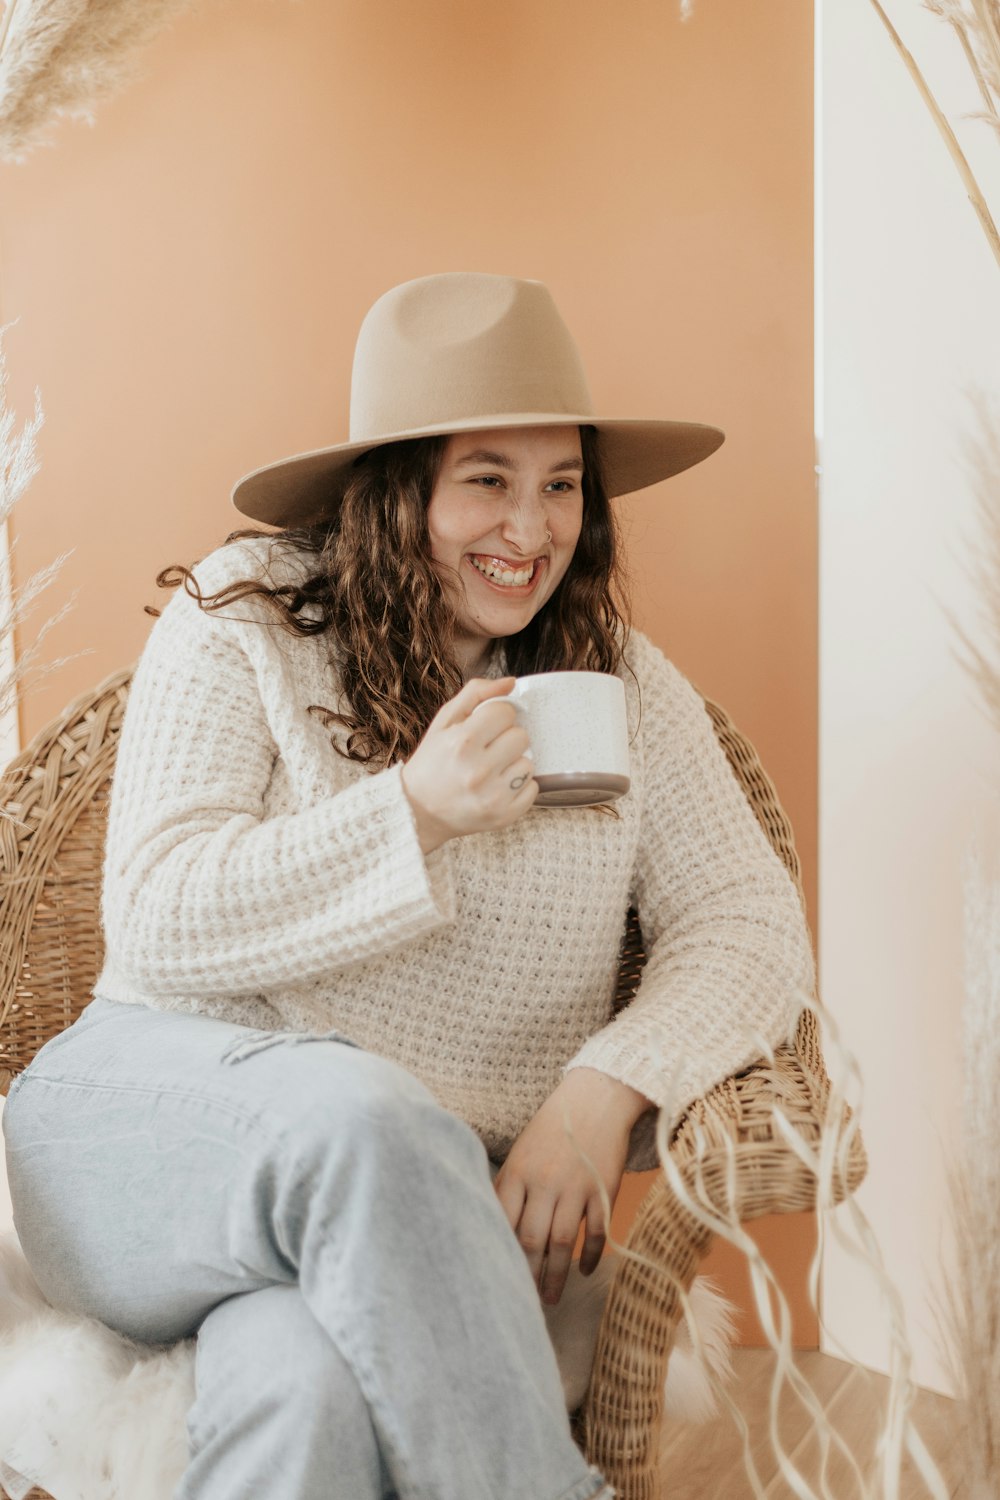 woman in white knit sweater and gray pants holding white ceramic mug